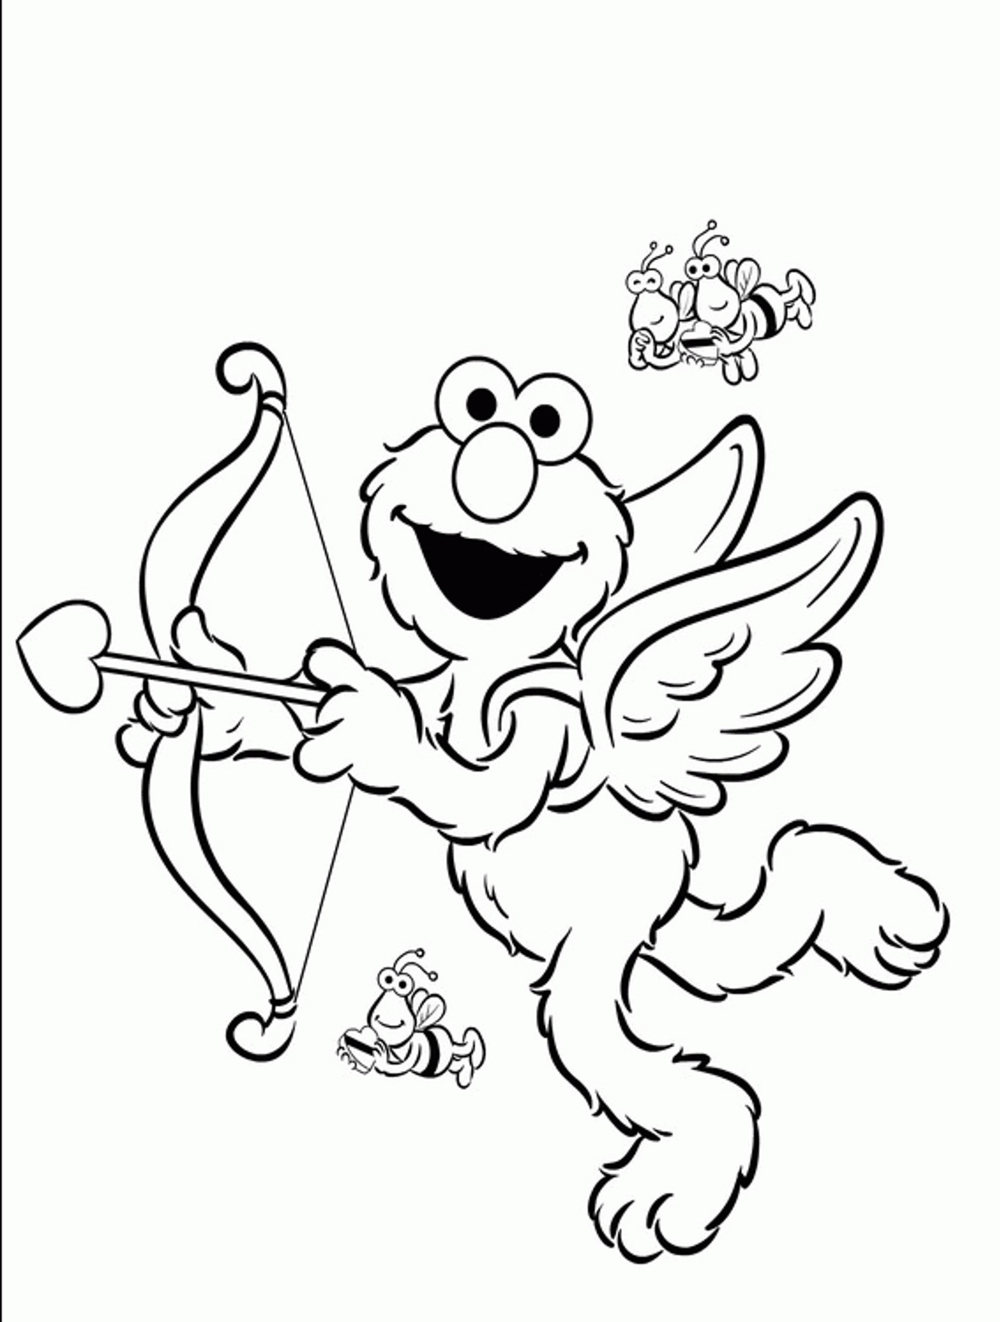 Print Download Elmo Coloring Pages for Childrens Home